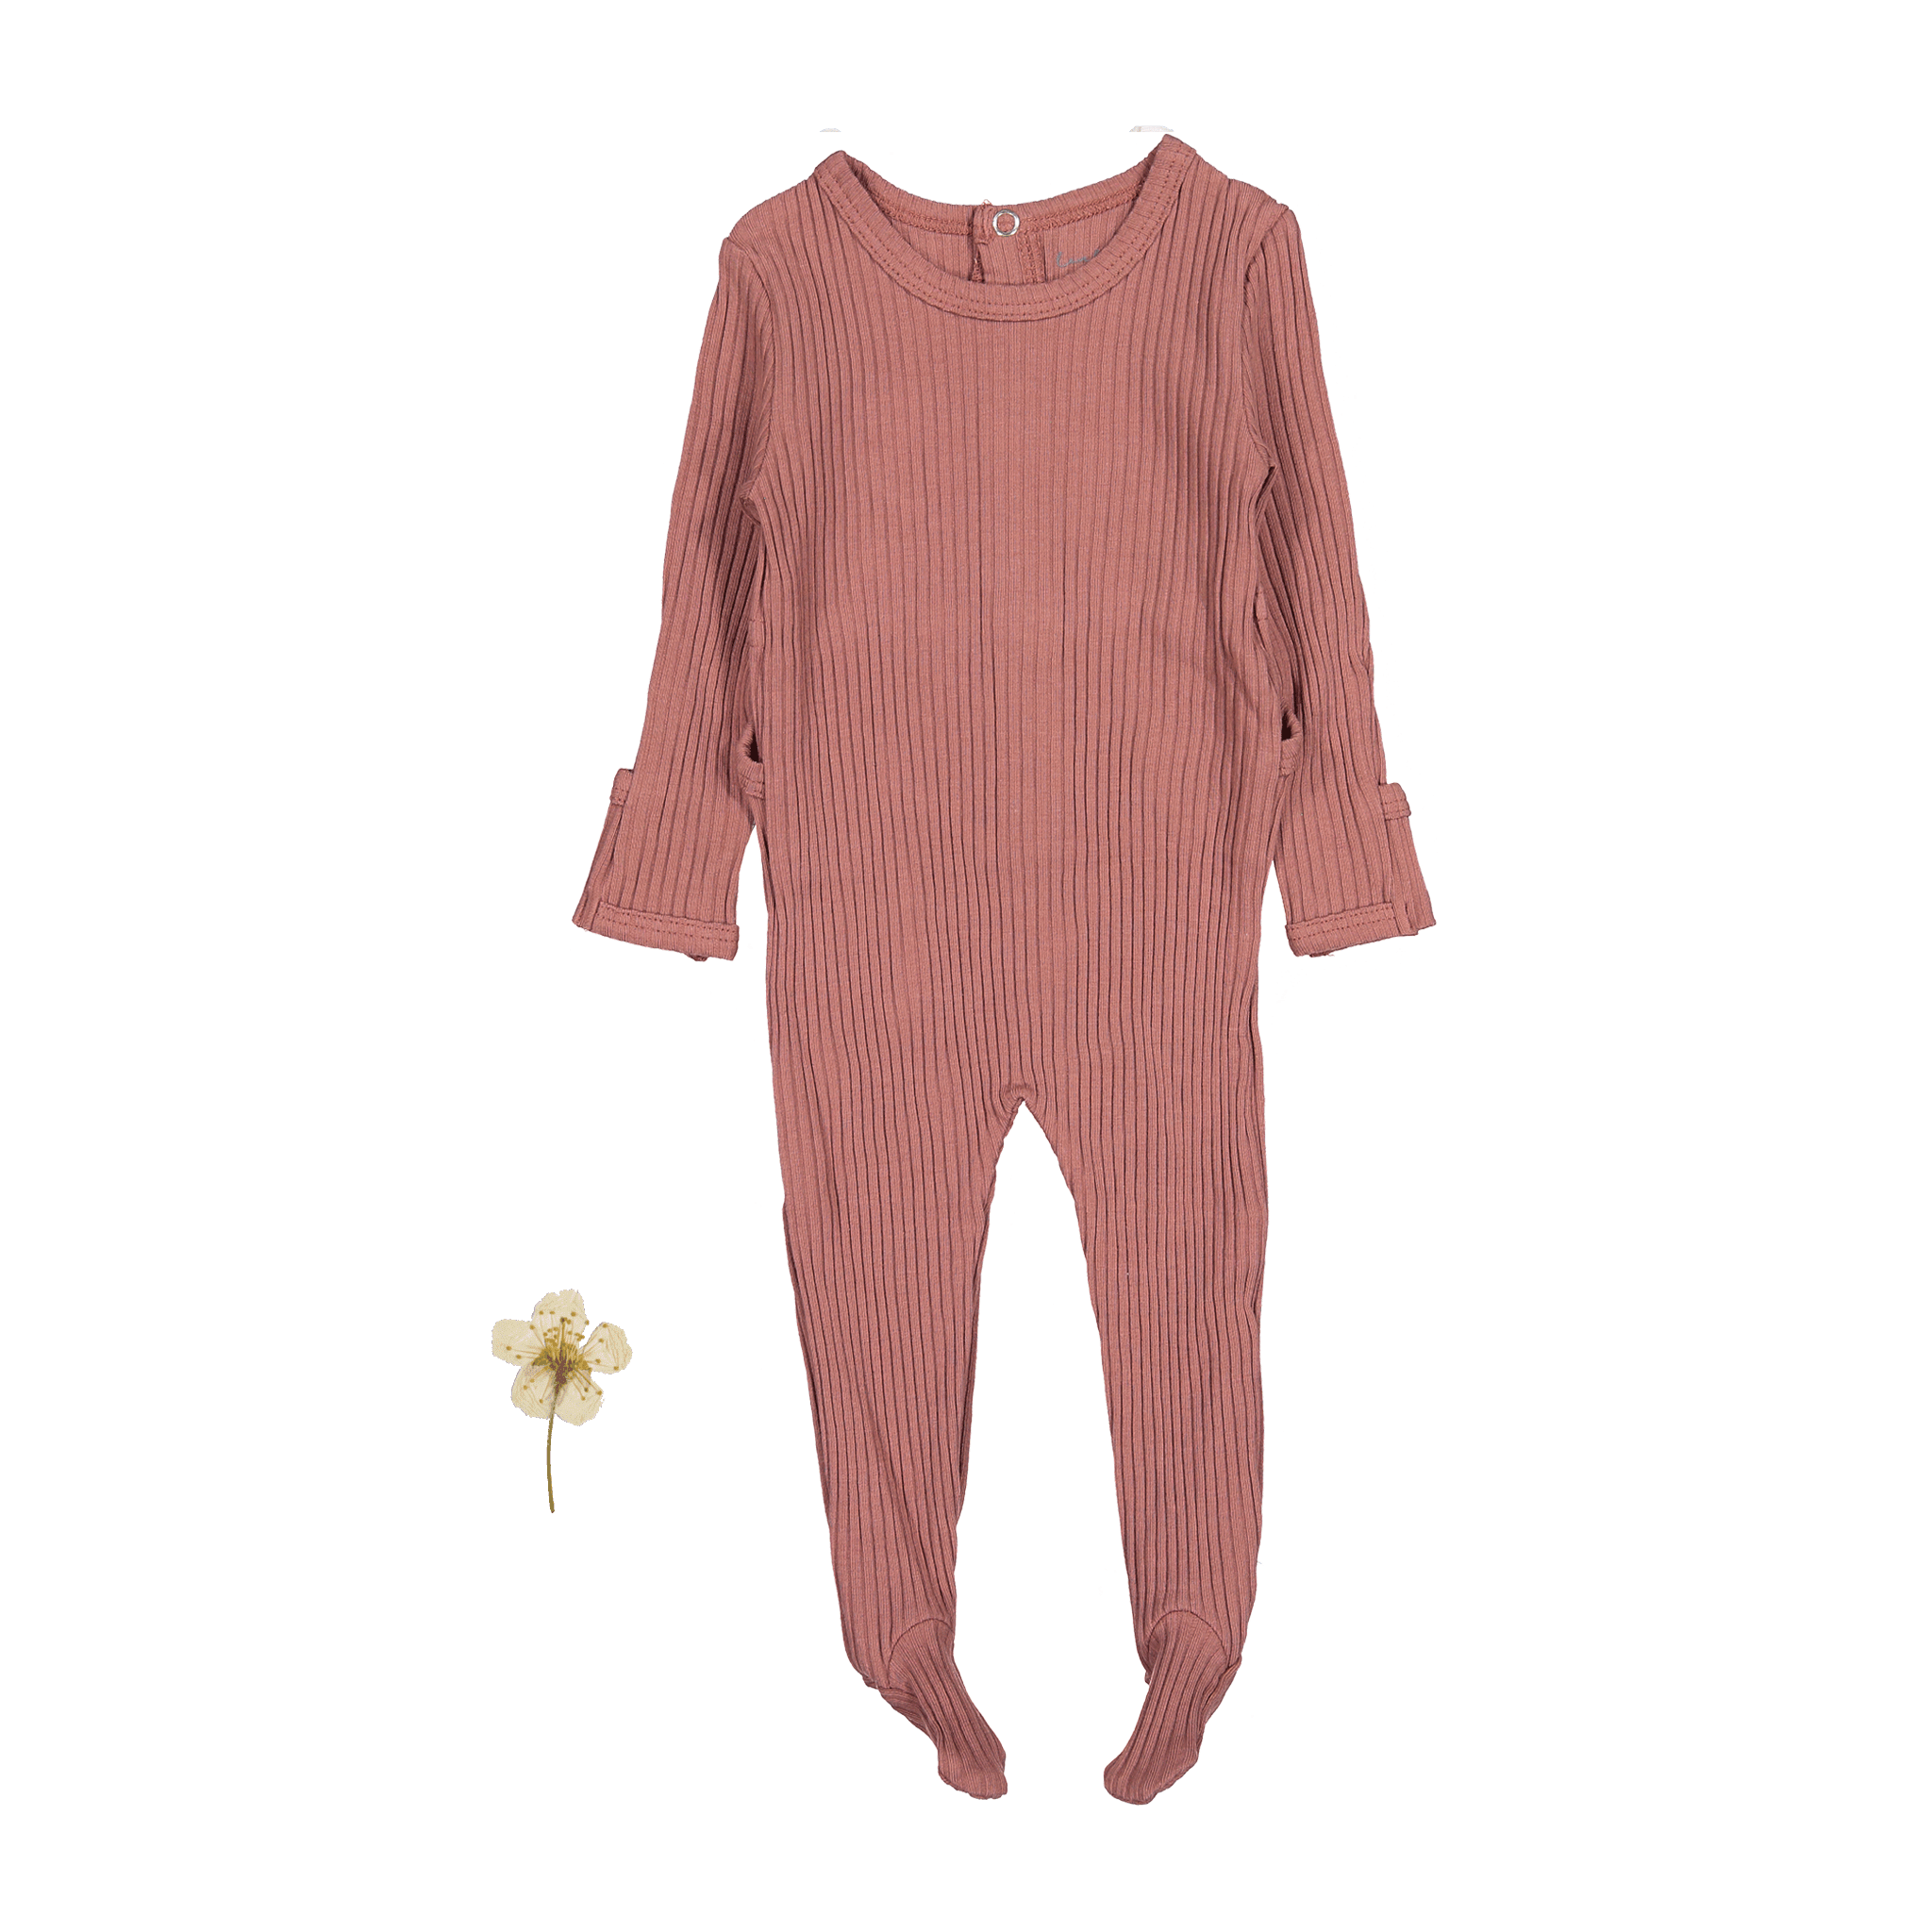 The Romper - Rosewood Ribbed